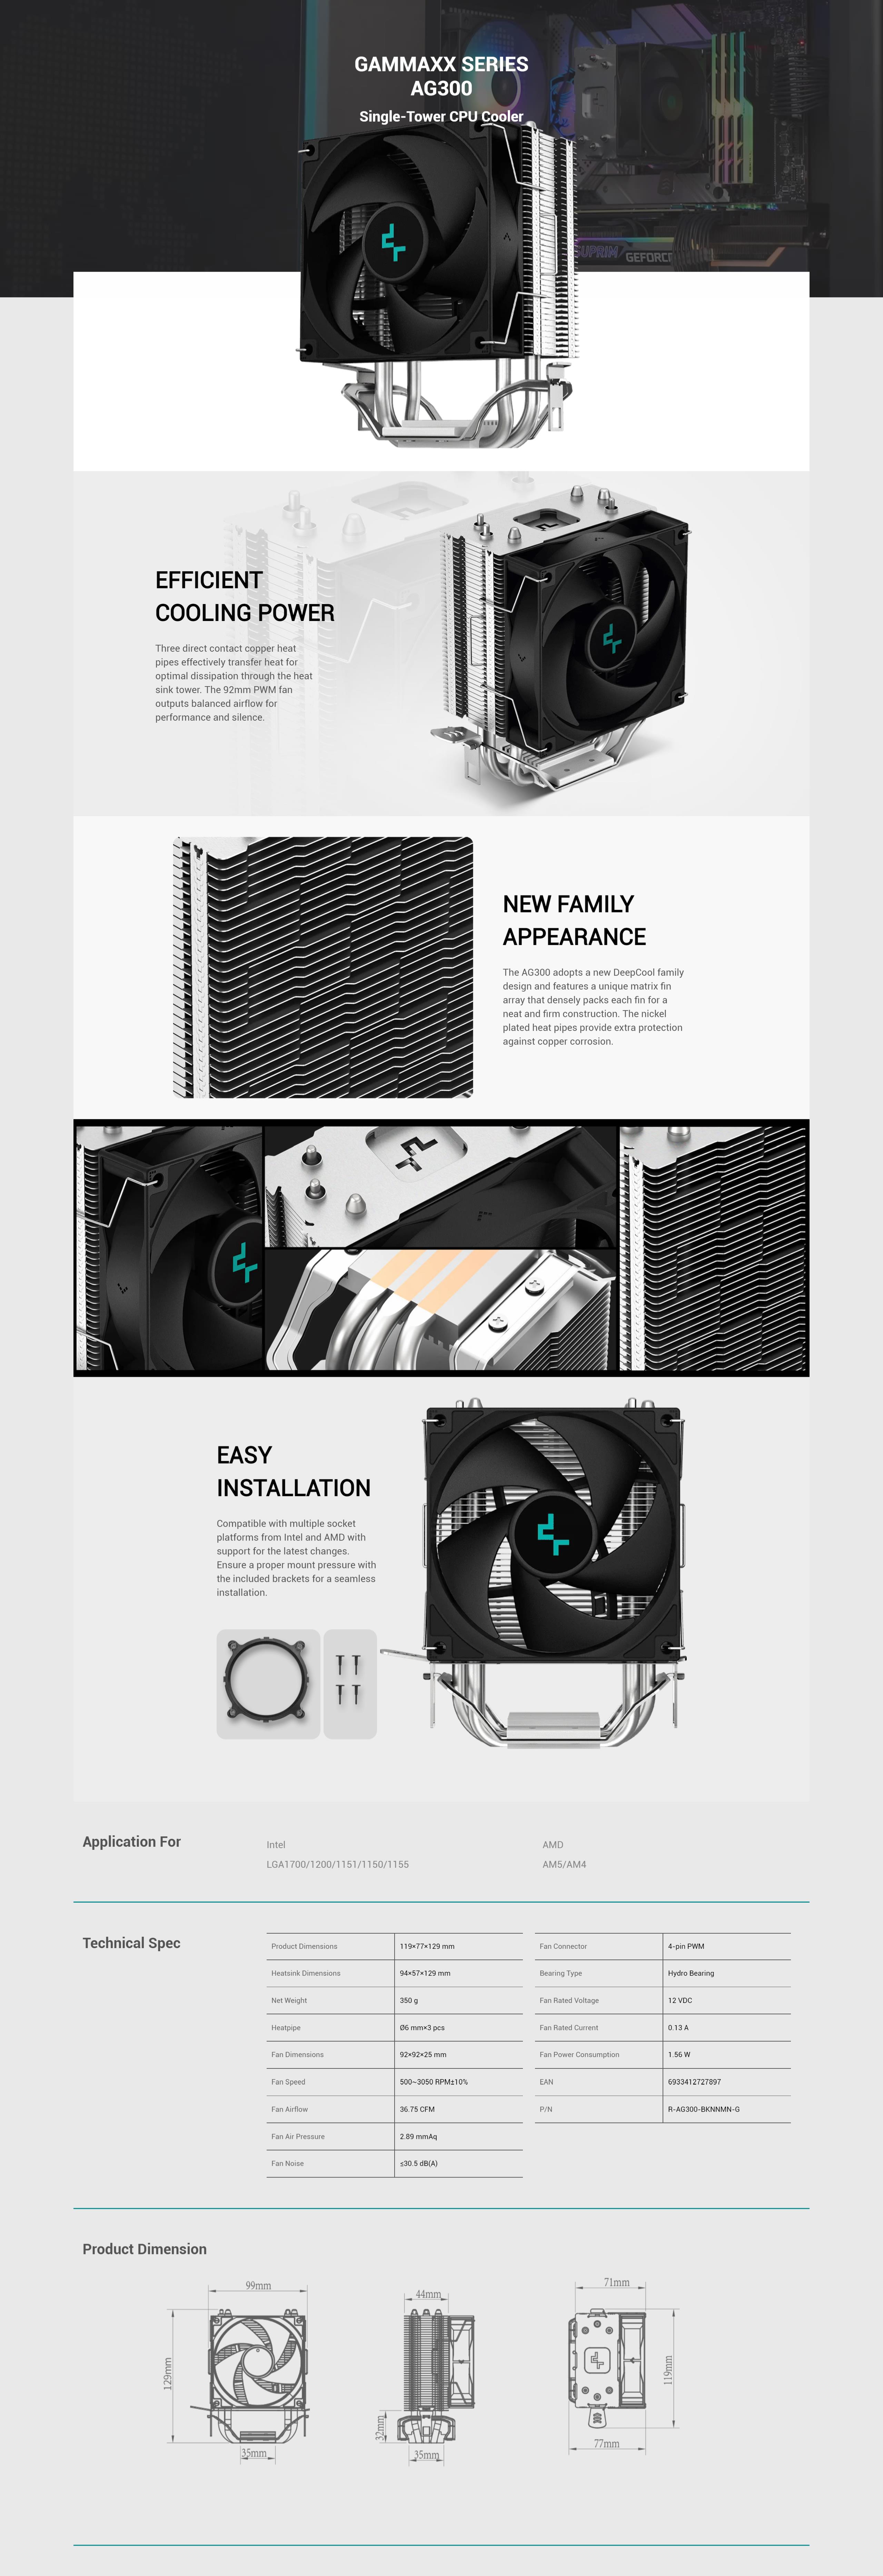 A large marketing image providing additional information about the product DeepCool GAMMAXX AG300 CPU Cooler - Additional alt info not provided